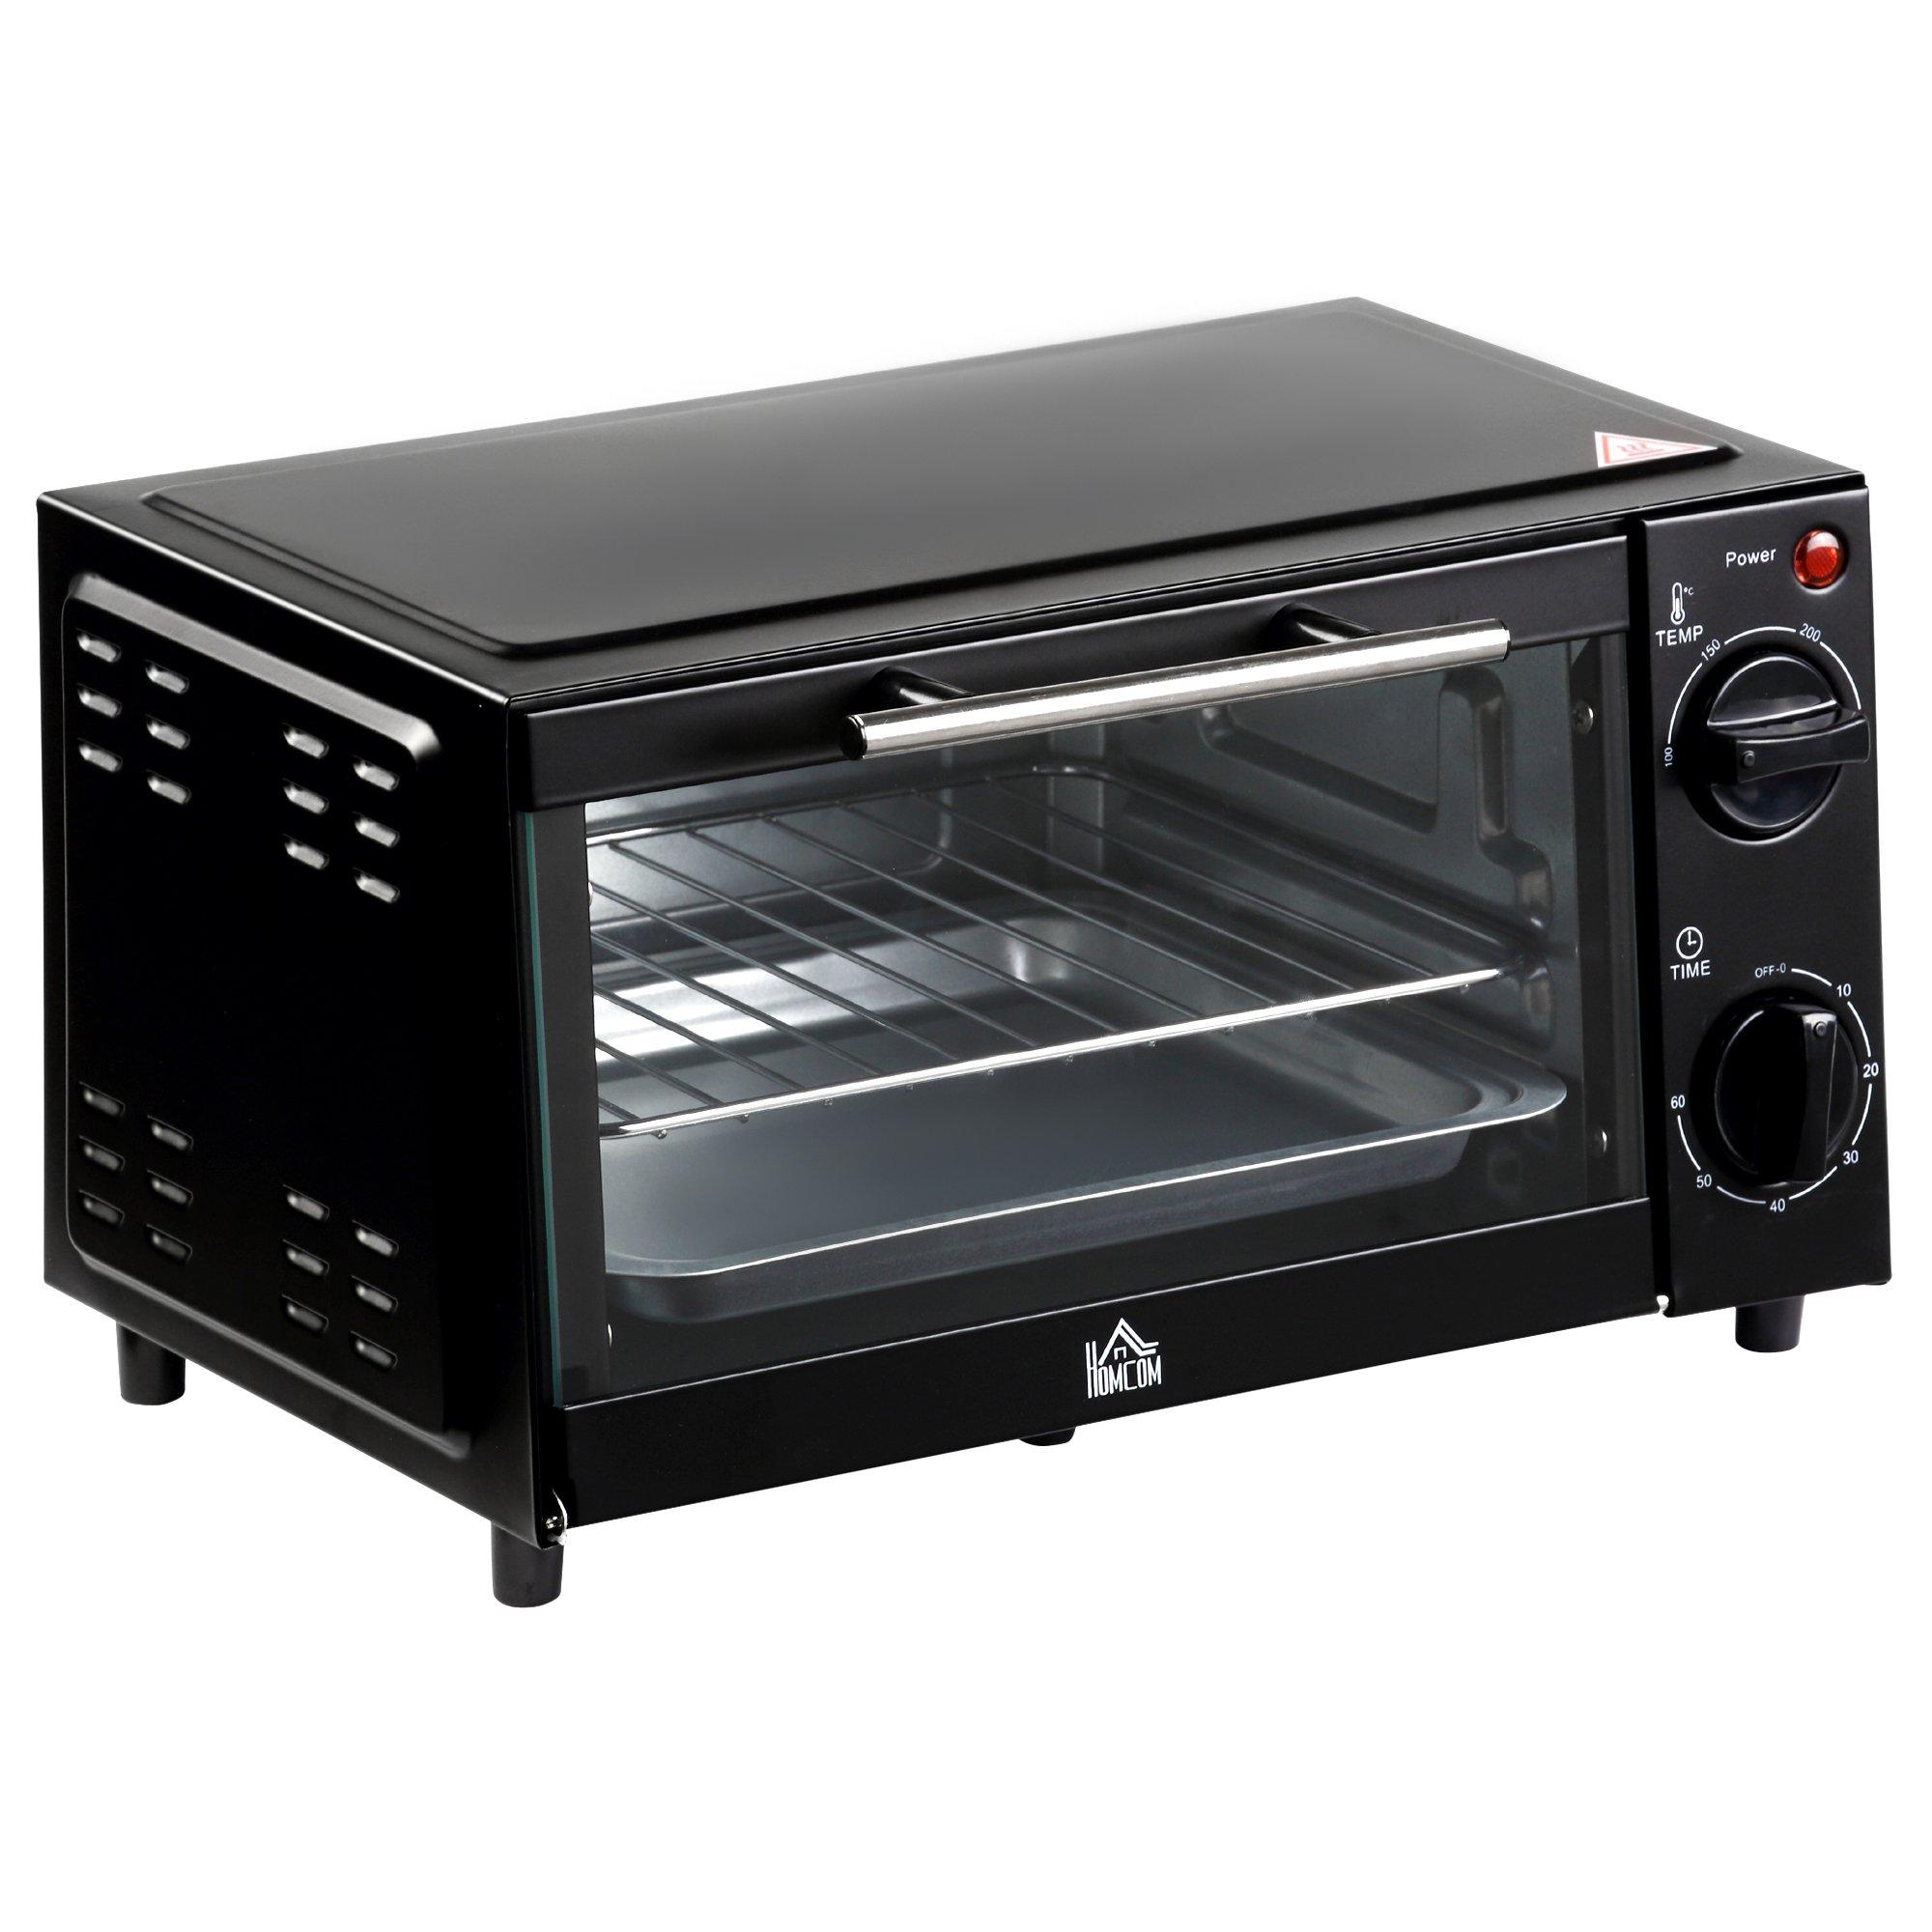 Mini Oven 9L Countertop Electric Toaster Oven Adjustable